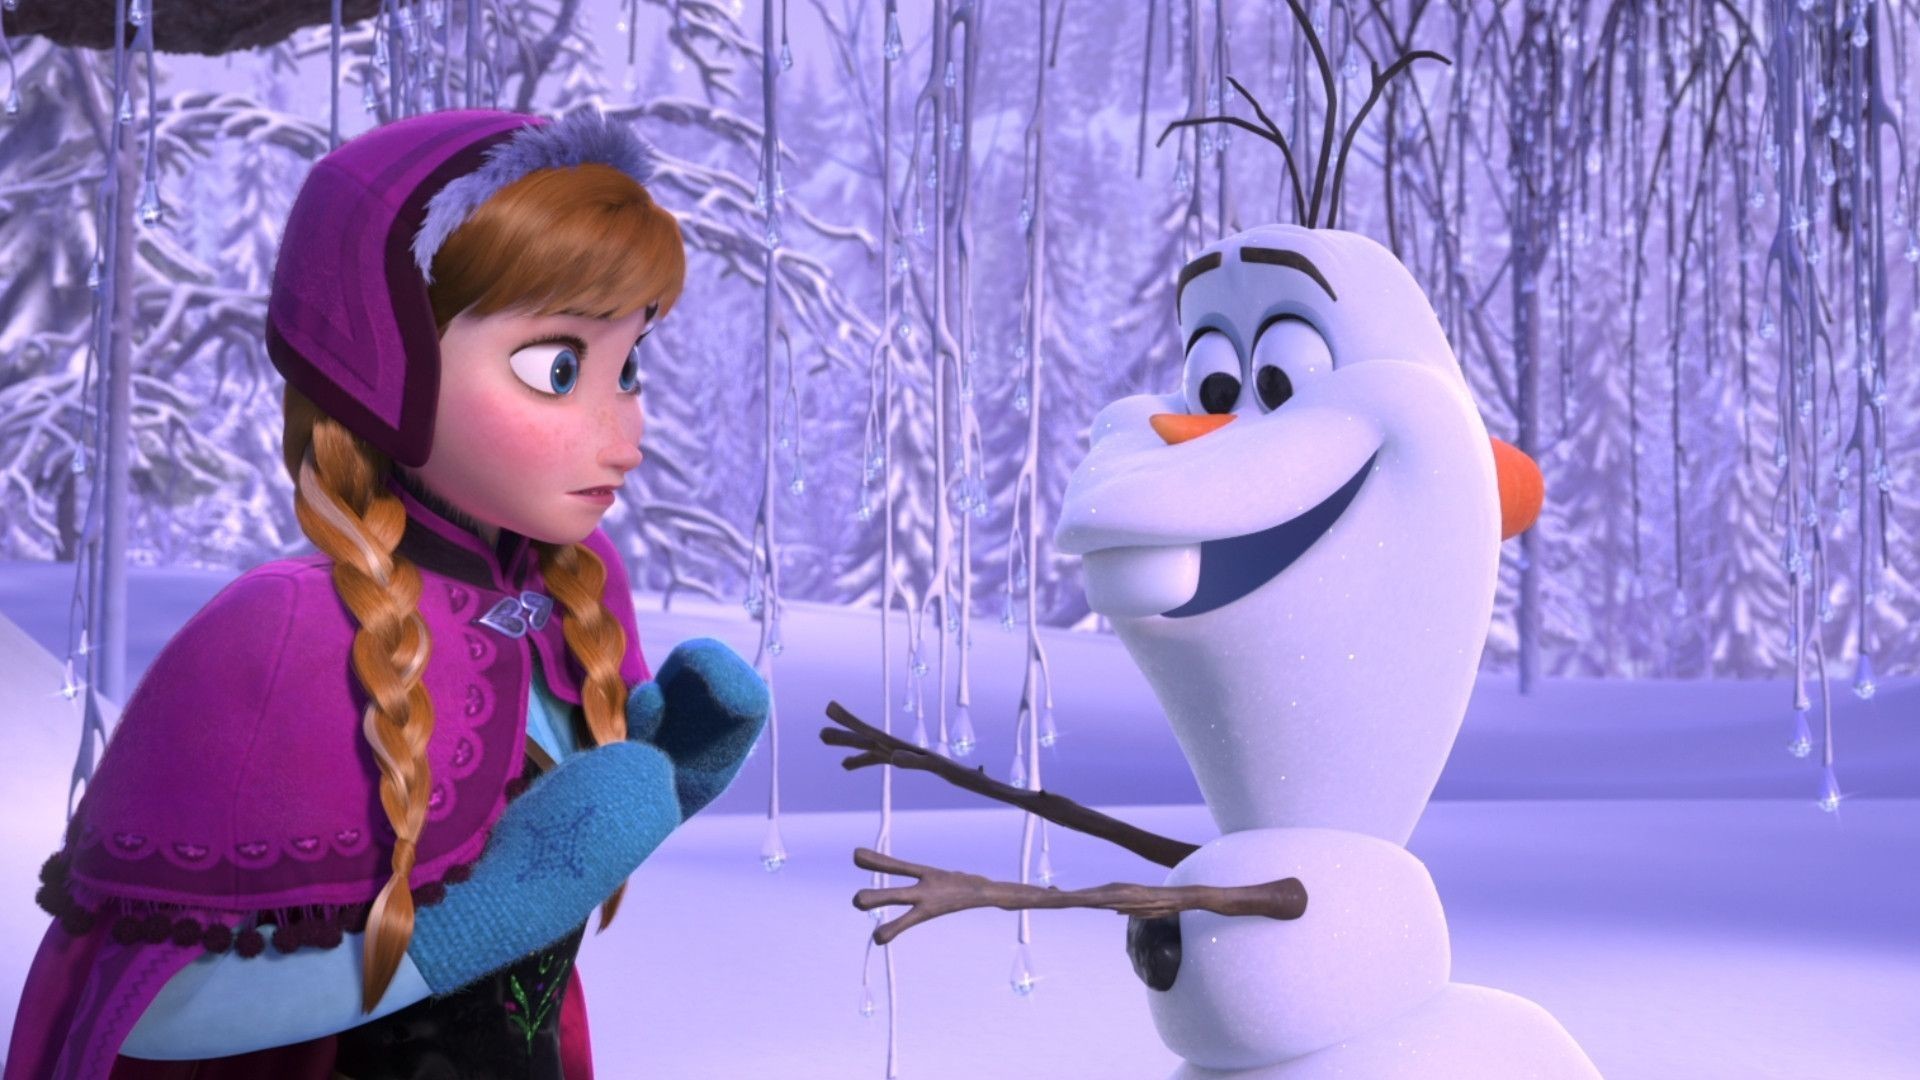 1920x1080 1776x2400 Olaf Wallpaper Lovely Olaf Frozen This is A Movie but Still so  Adorable that I Had to Pin